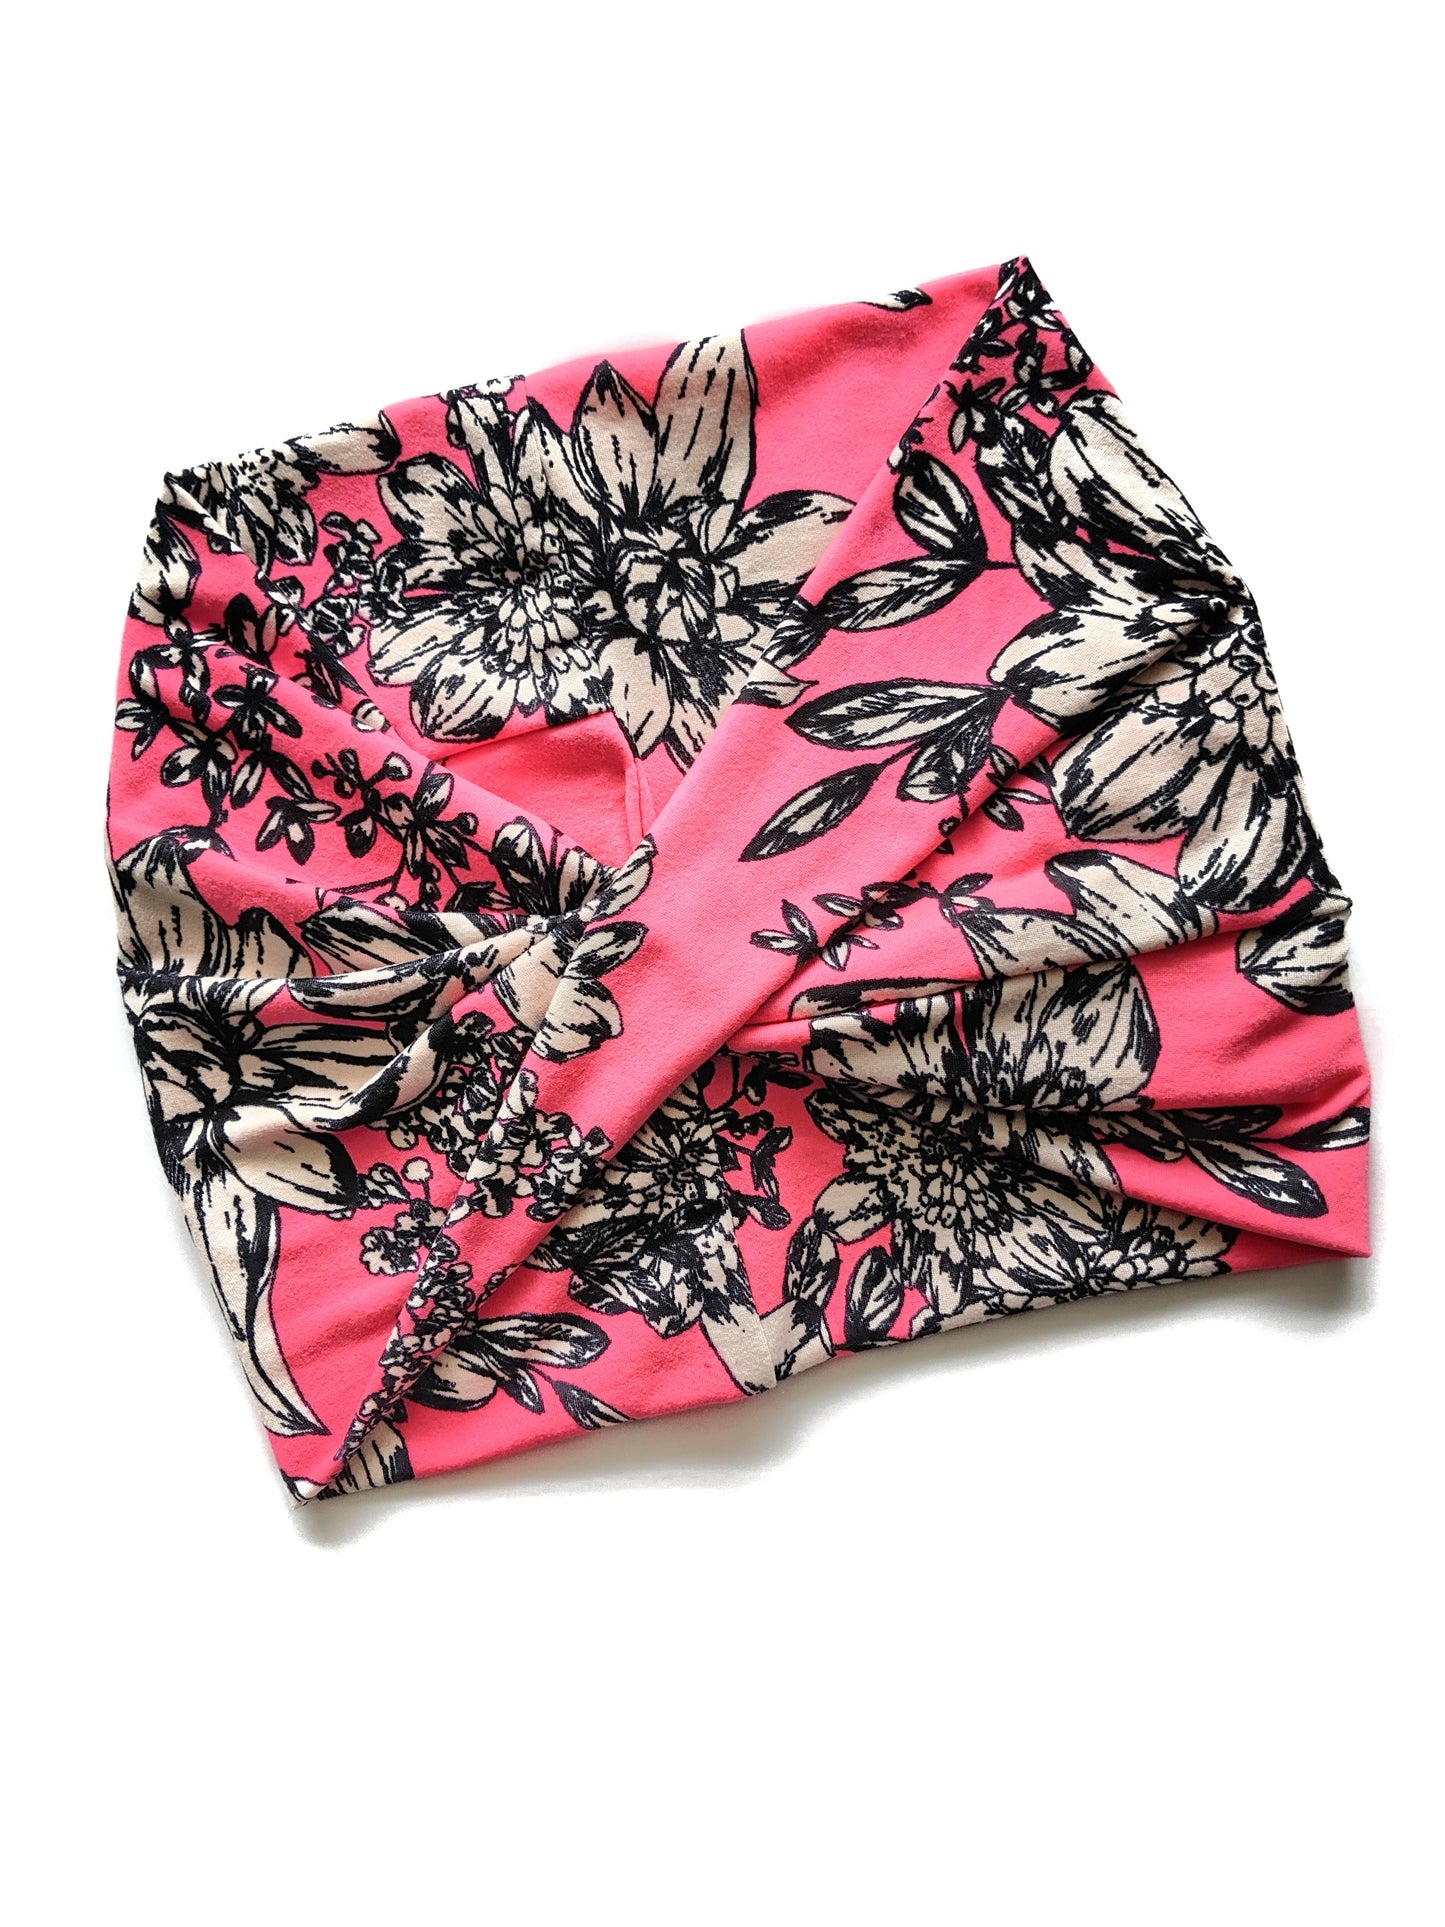 Neon pink Floral wide headband - Crunchy Love Co.